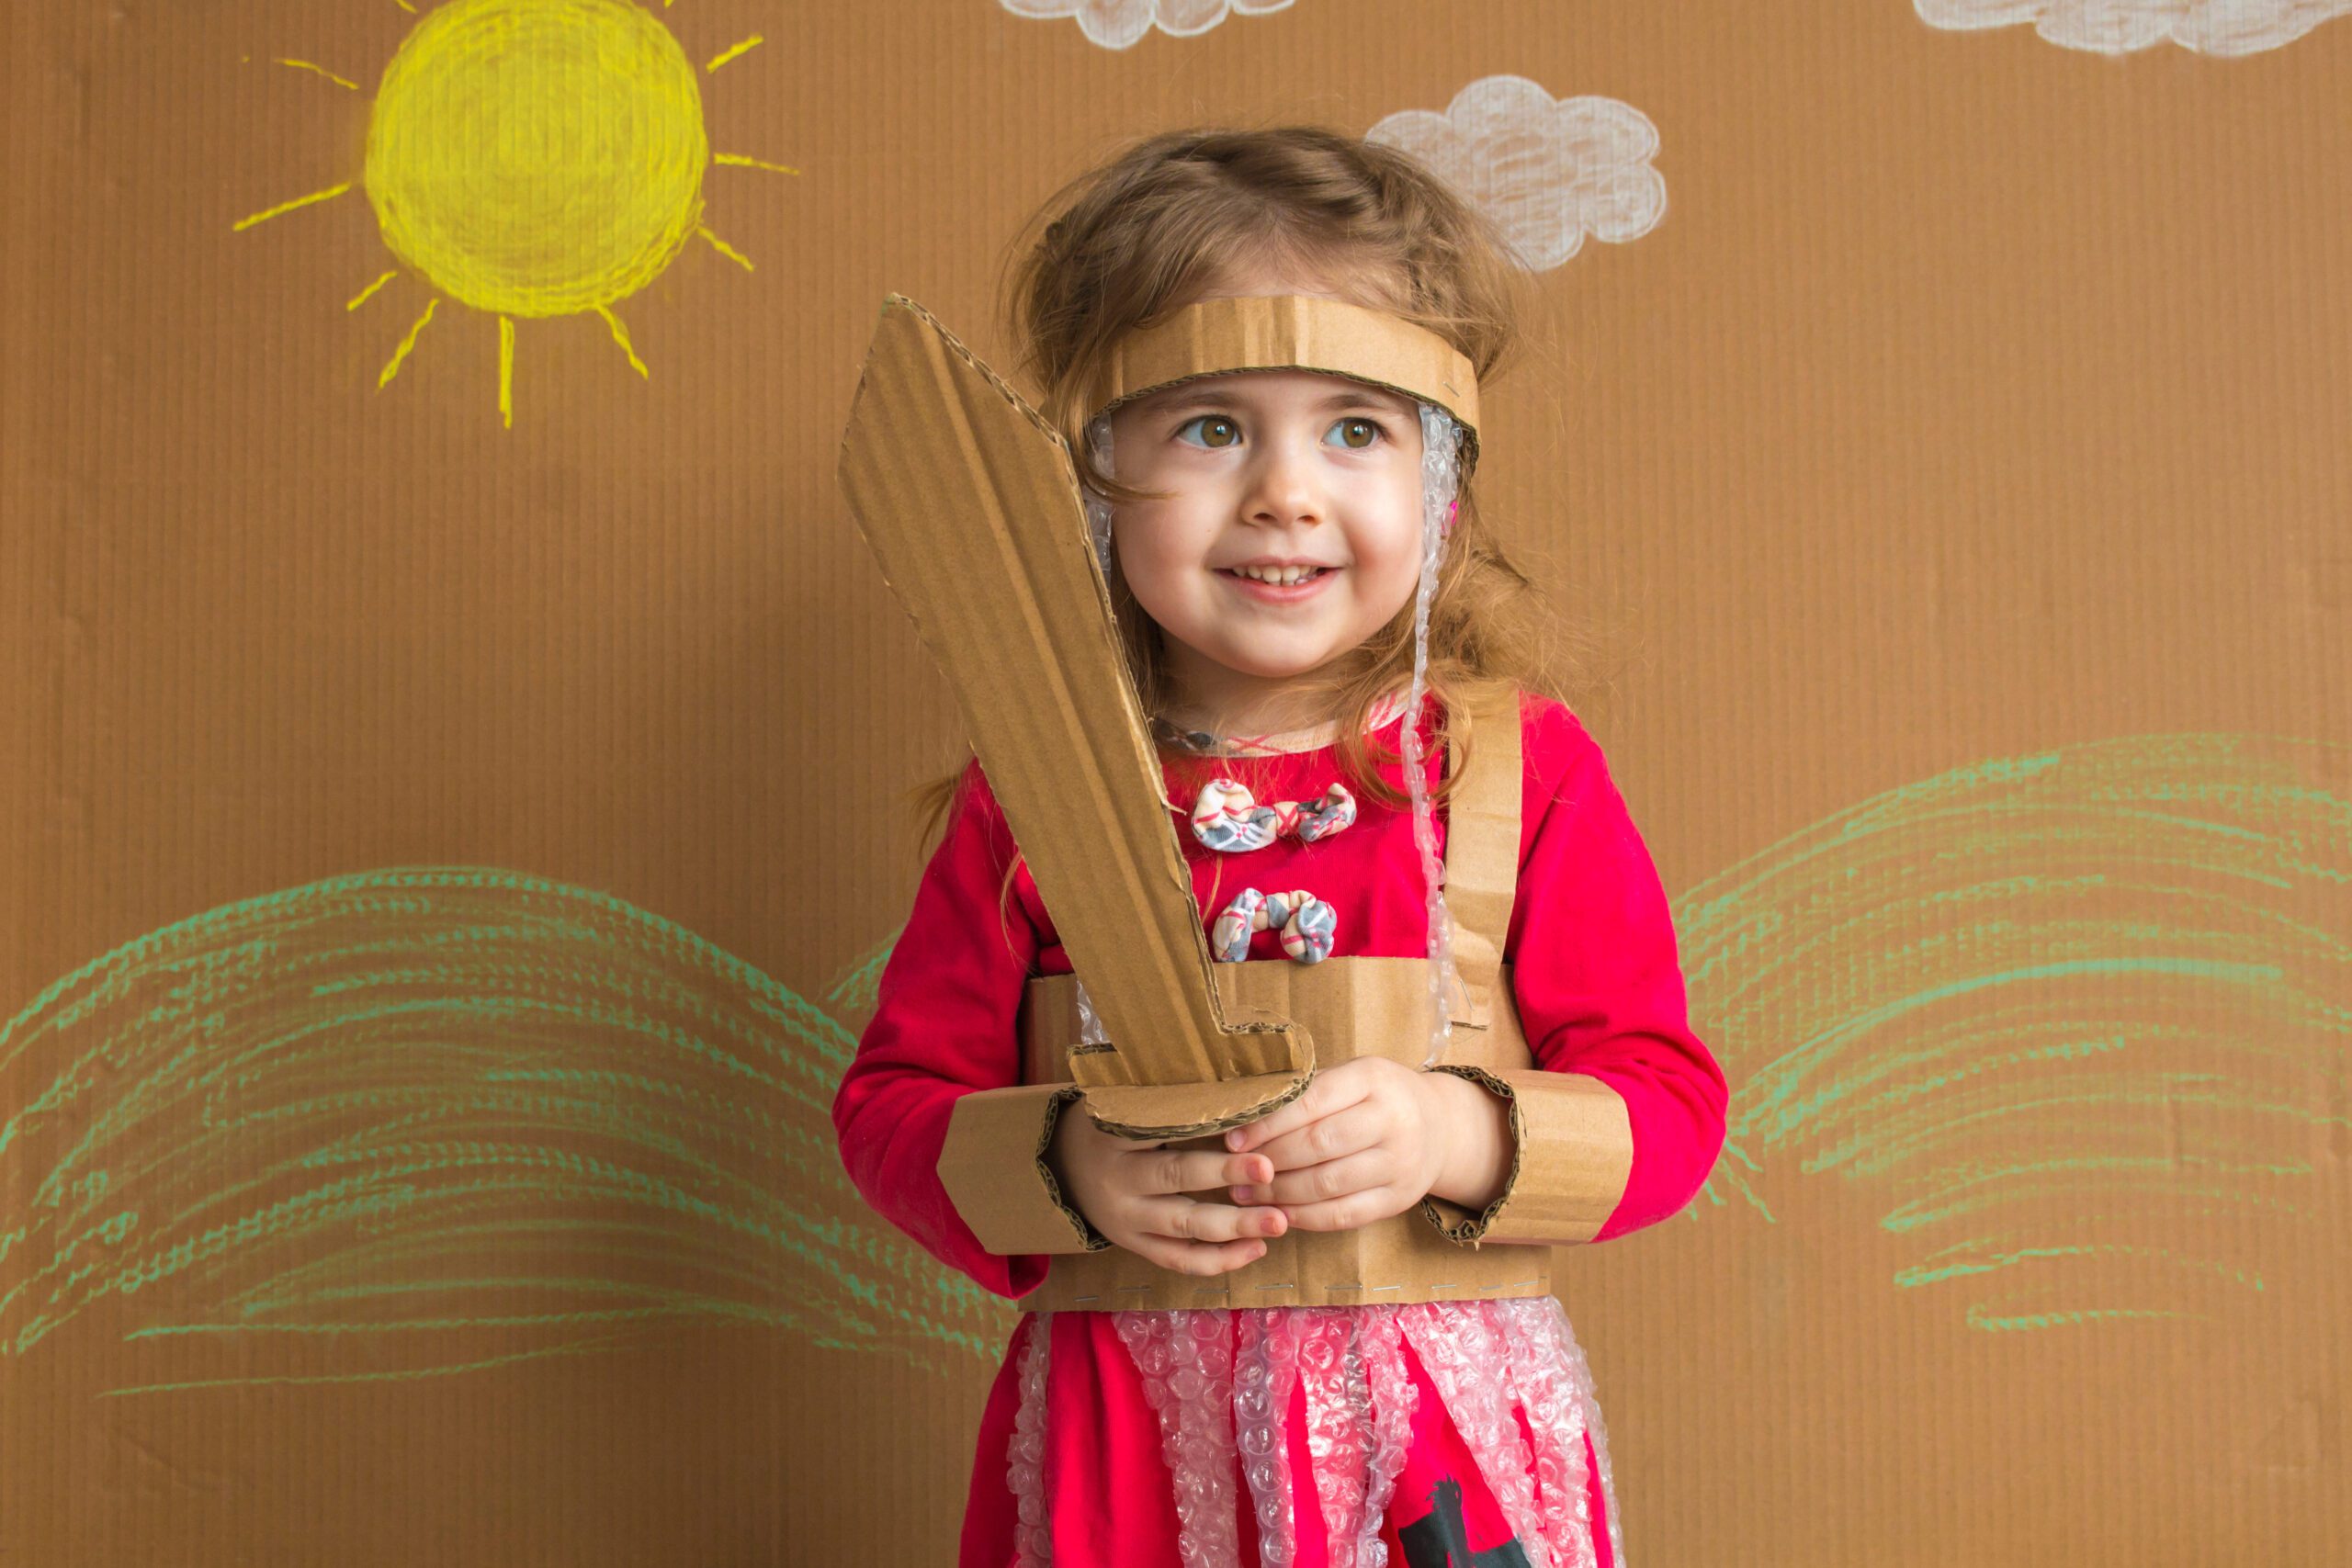 young girl child with cardboard sword smiling, page of swords